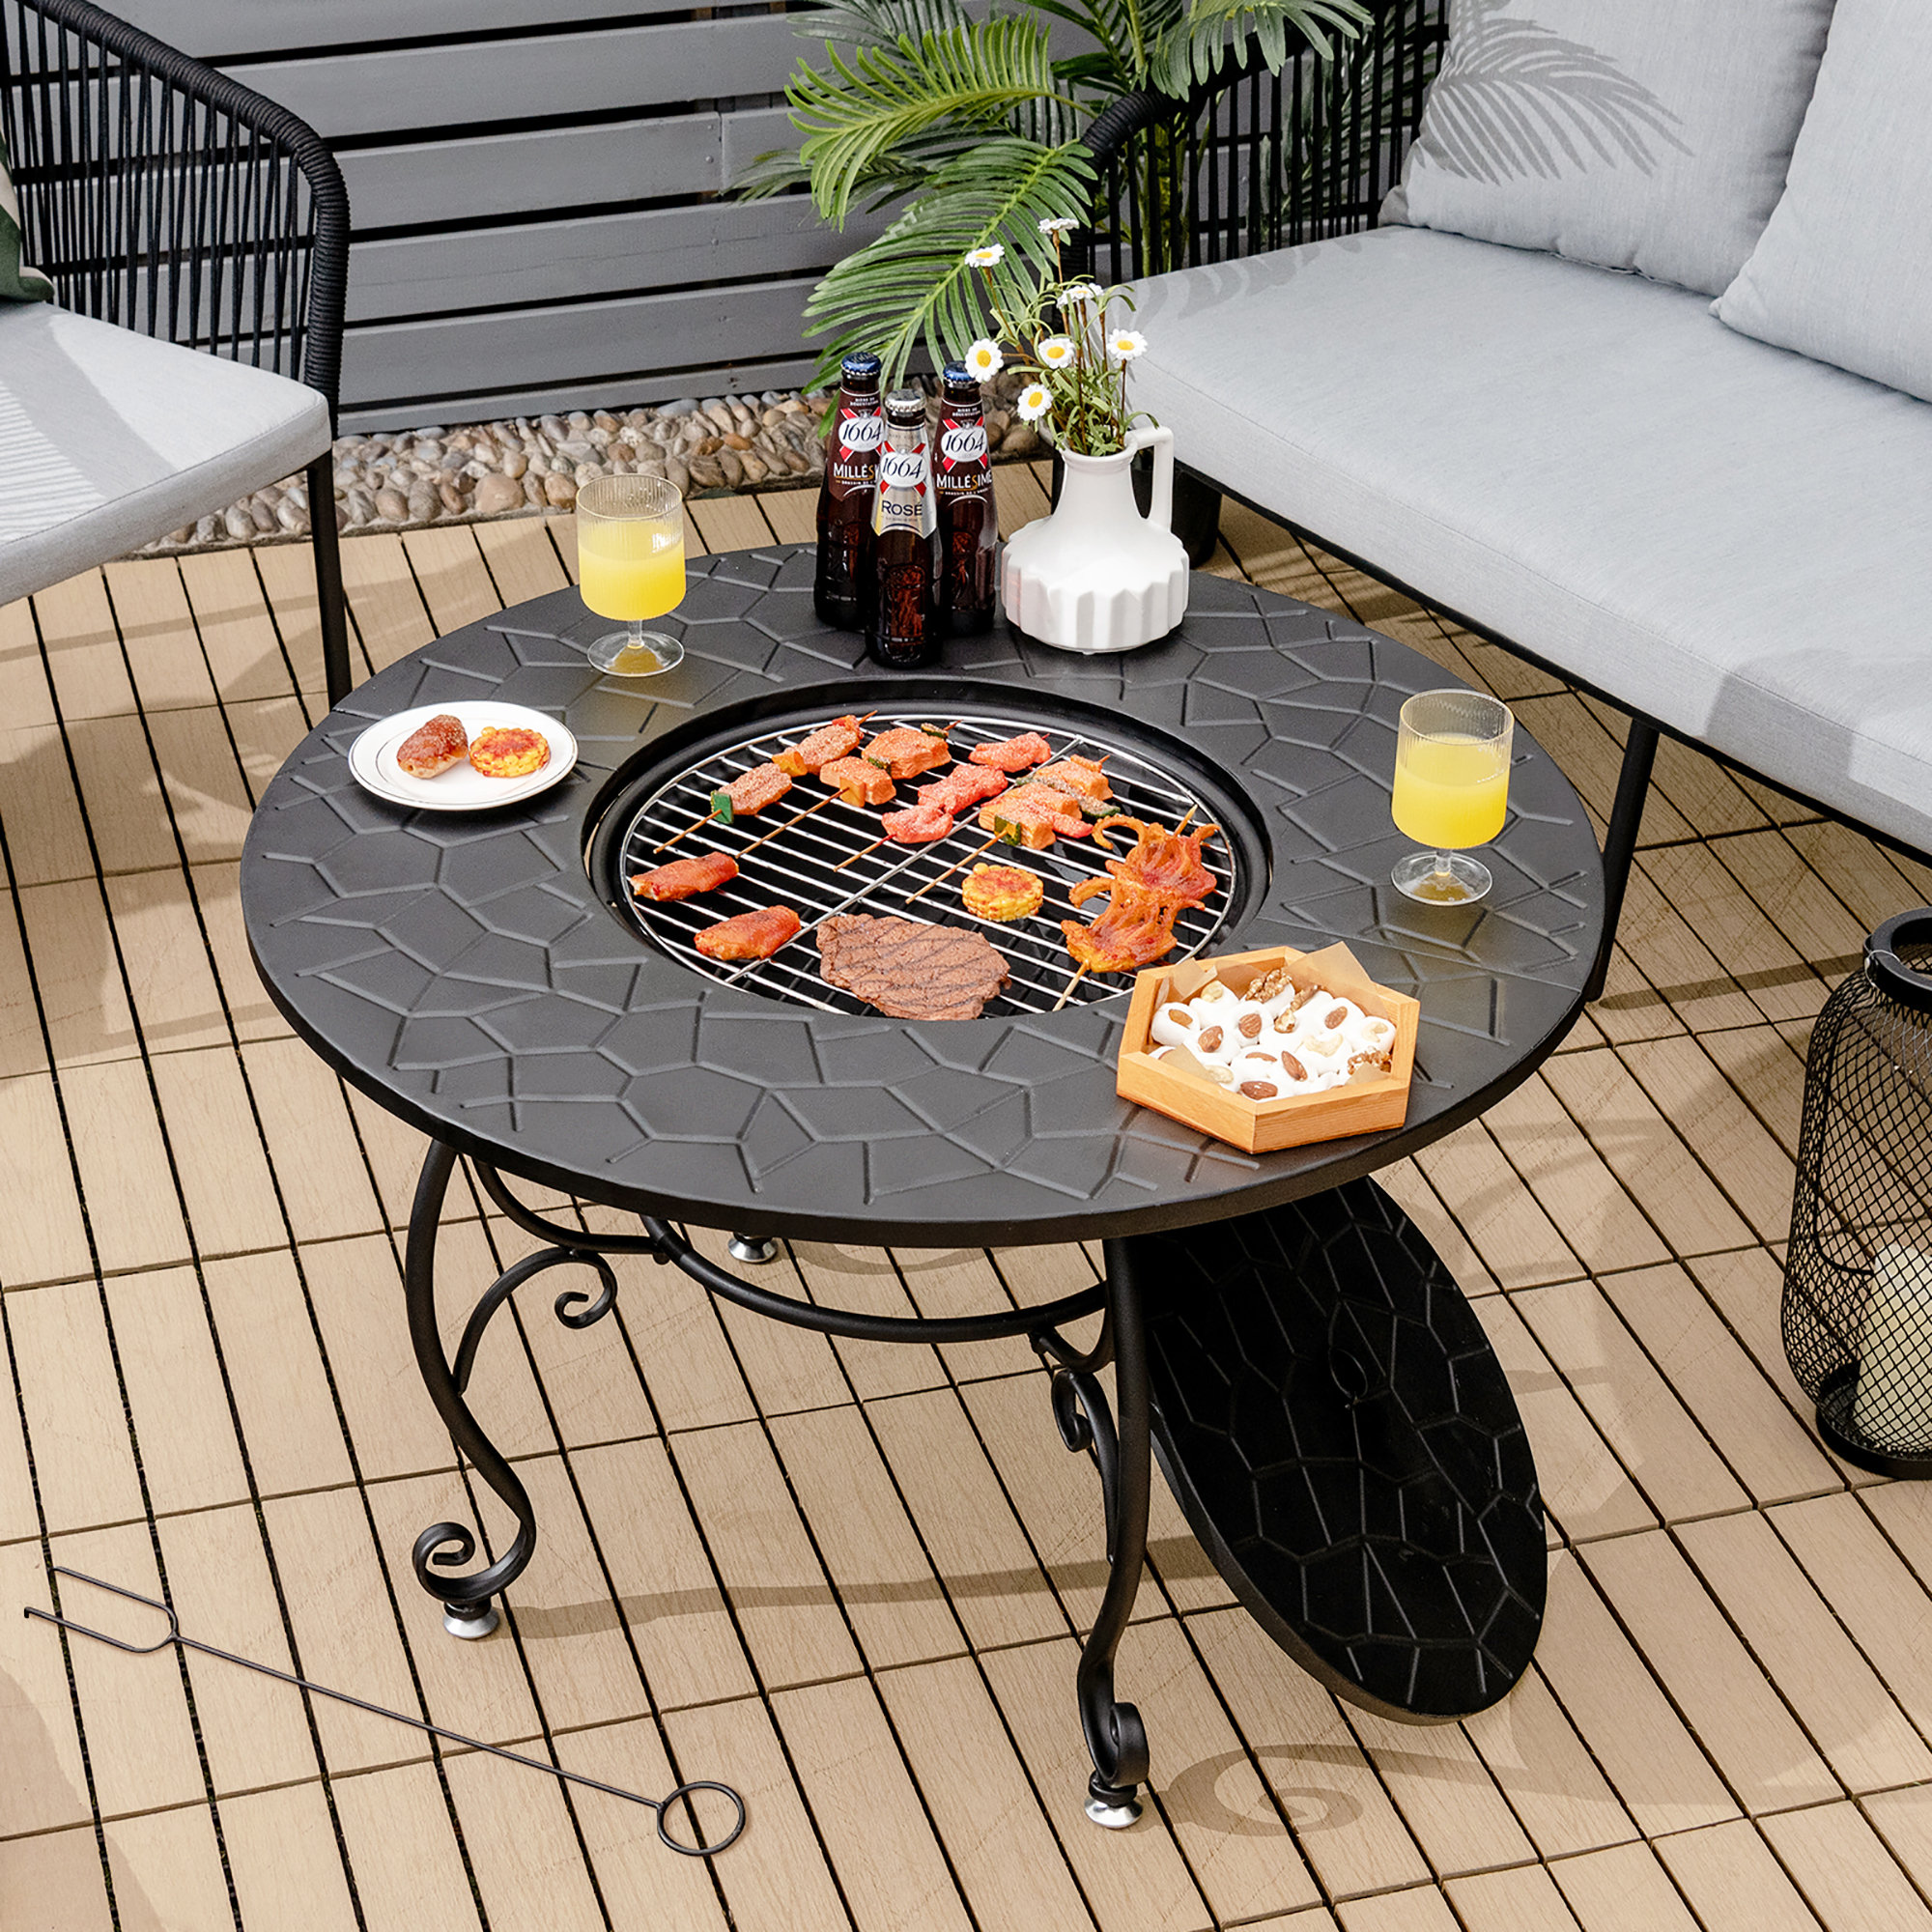 Outdoor Brazier Coffee Table with a high quality cooking grid